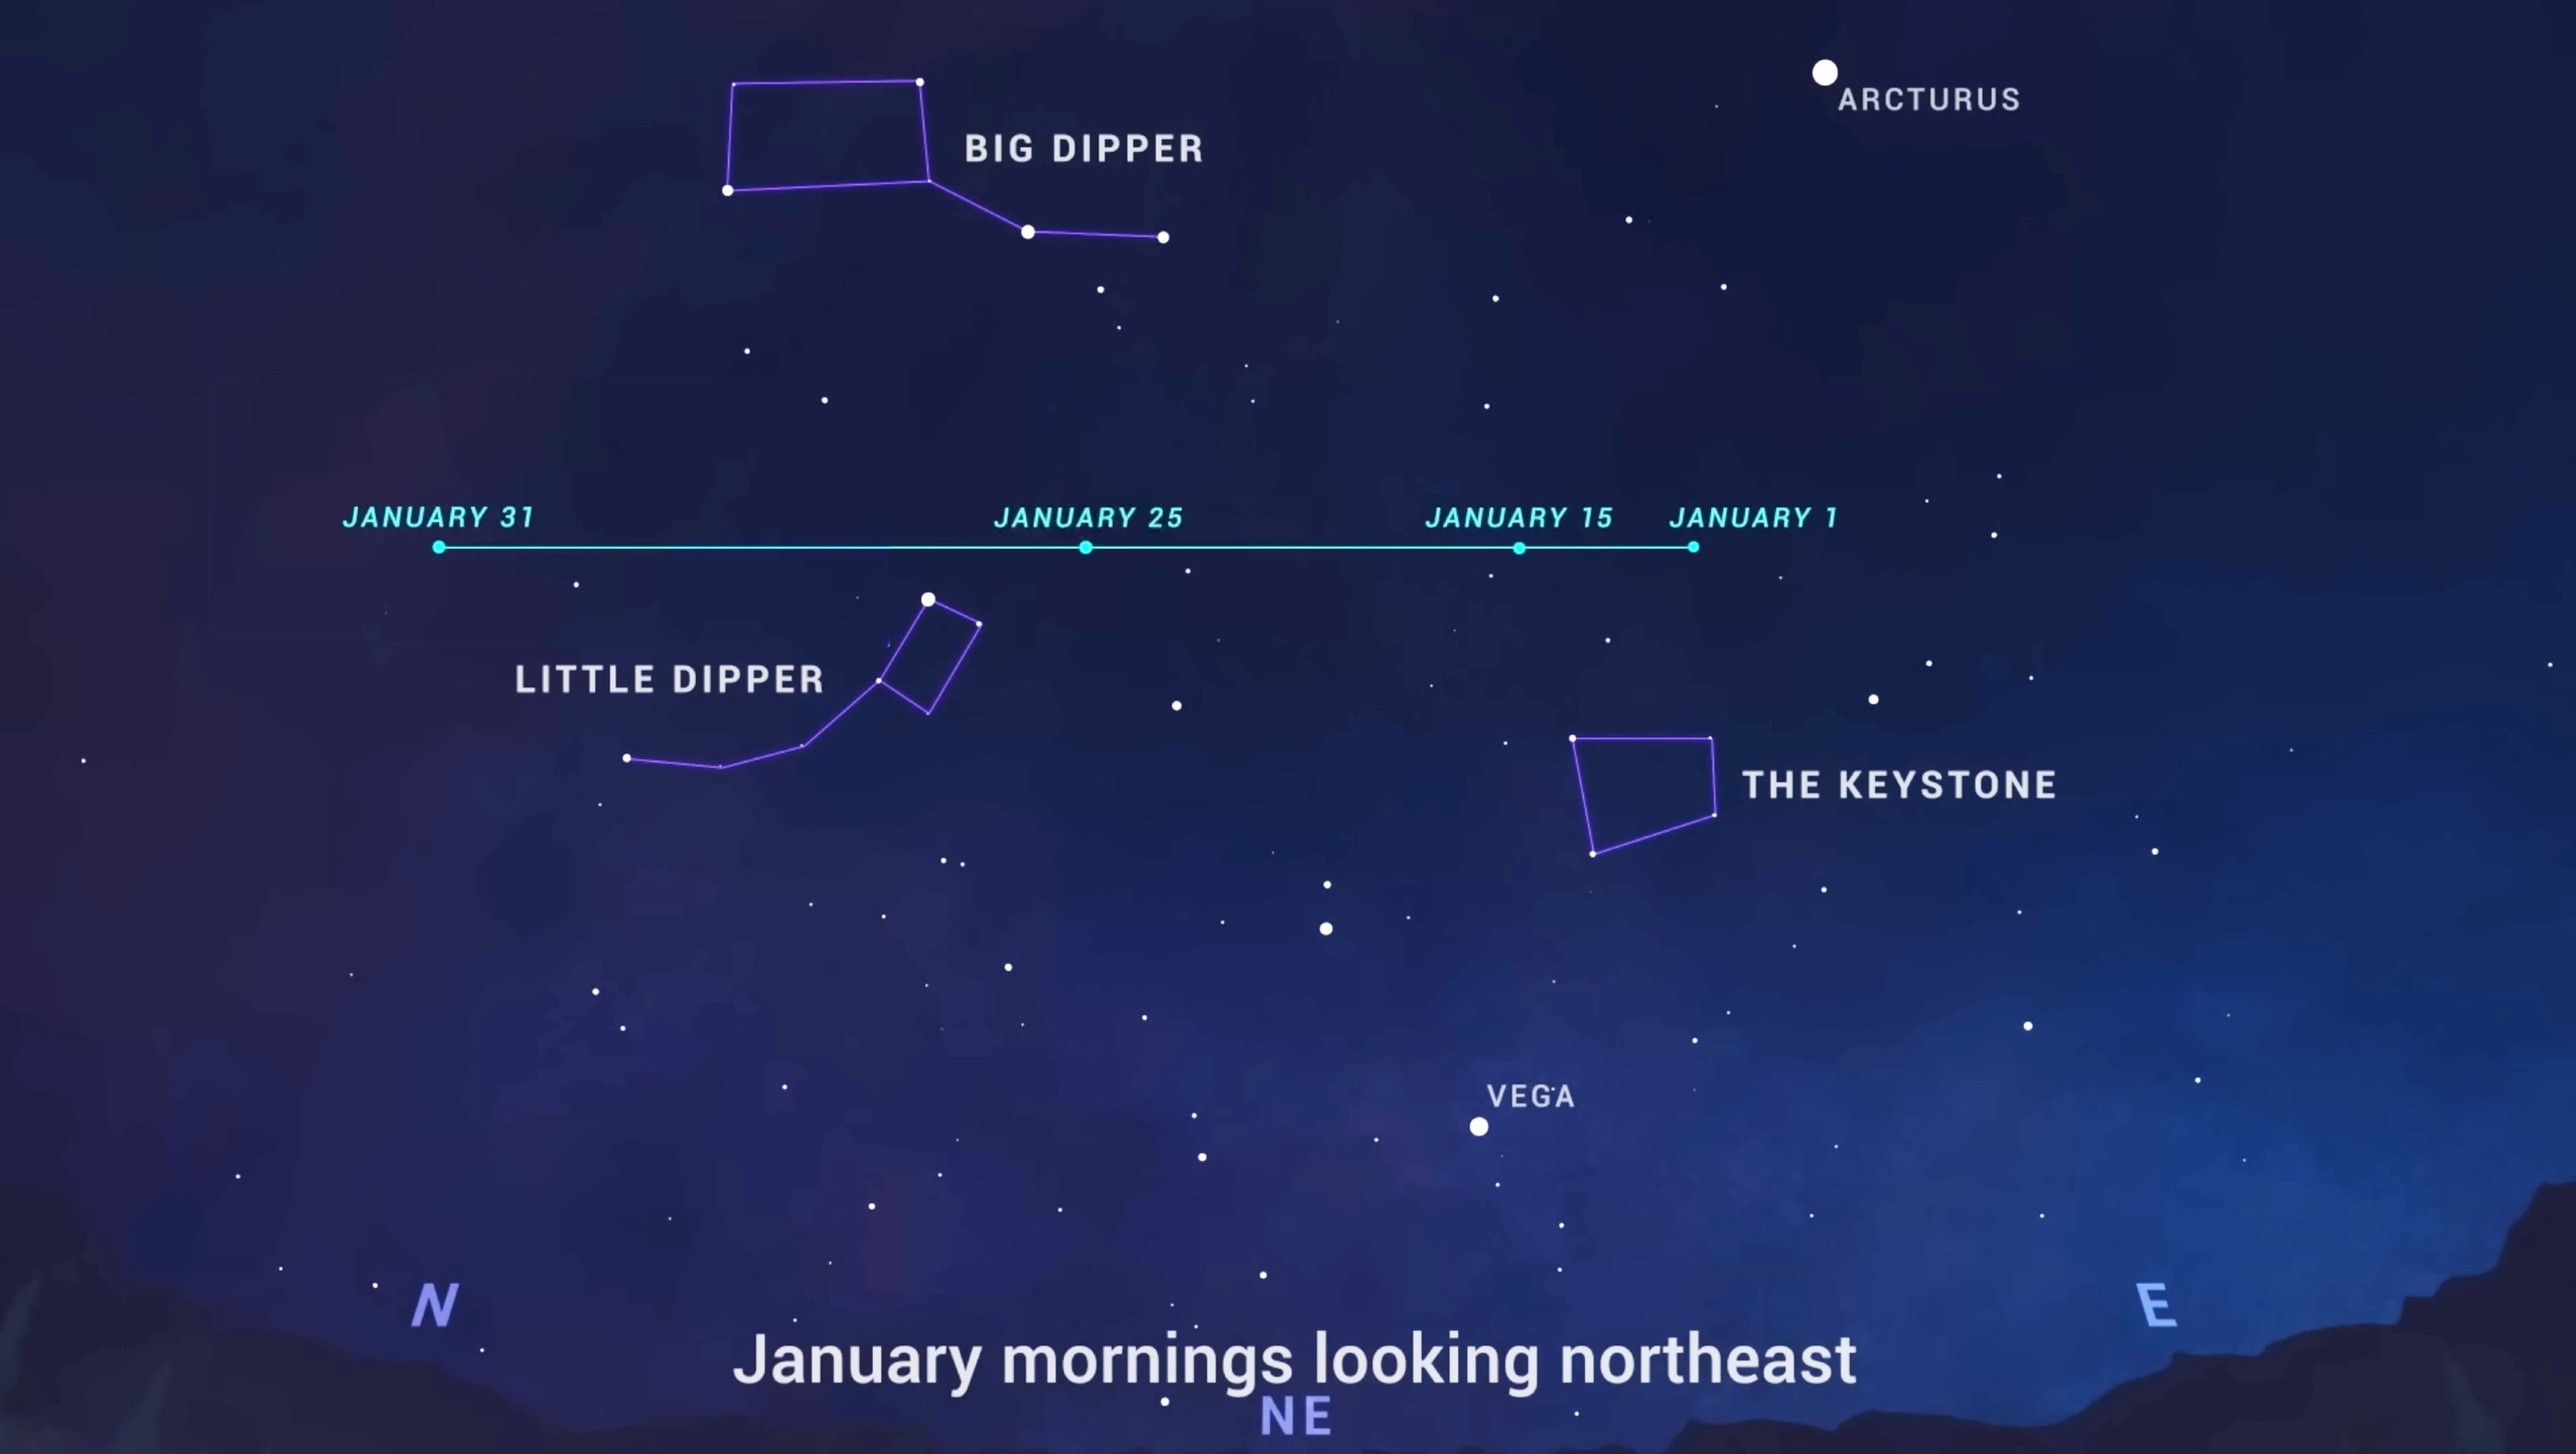 A NASA image showing the path of comet C/2022 E3 ZTF across the January sky for the Northern Hemisphere.